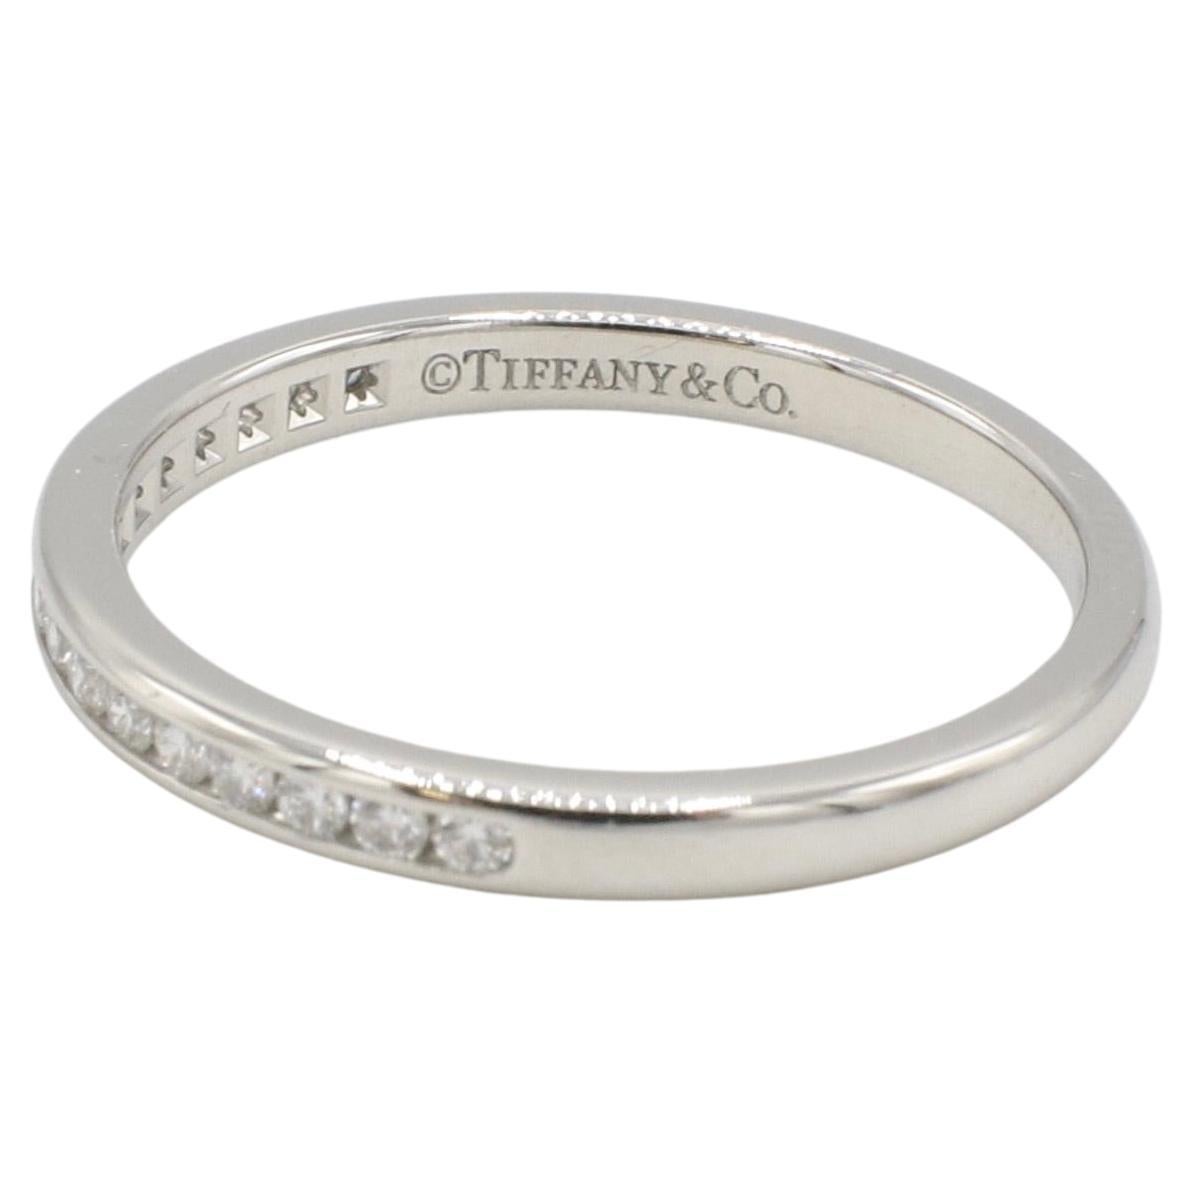 Tiffany & Co. Platinum Natural Diamond Channel Set Band Wedding Ring 
Metal: Platinum
Weight: 3.4 grams
Diamonds: Approx. .17 CTW round natural diamonds F-G VS
Width: 2.3mm
Size: 7 (US)
Signed: ©Tiffany & Co. PT950
Retail: $2,375 (2014)

